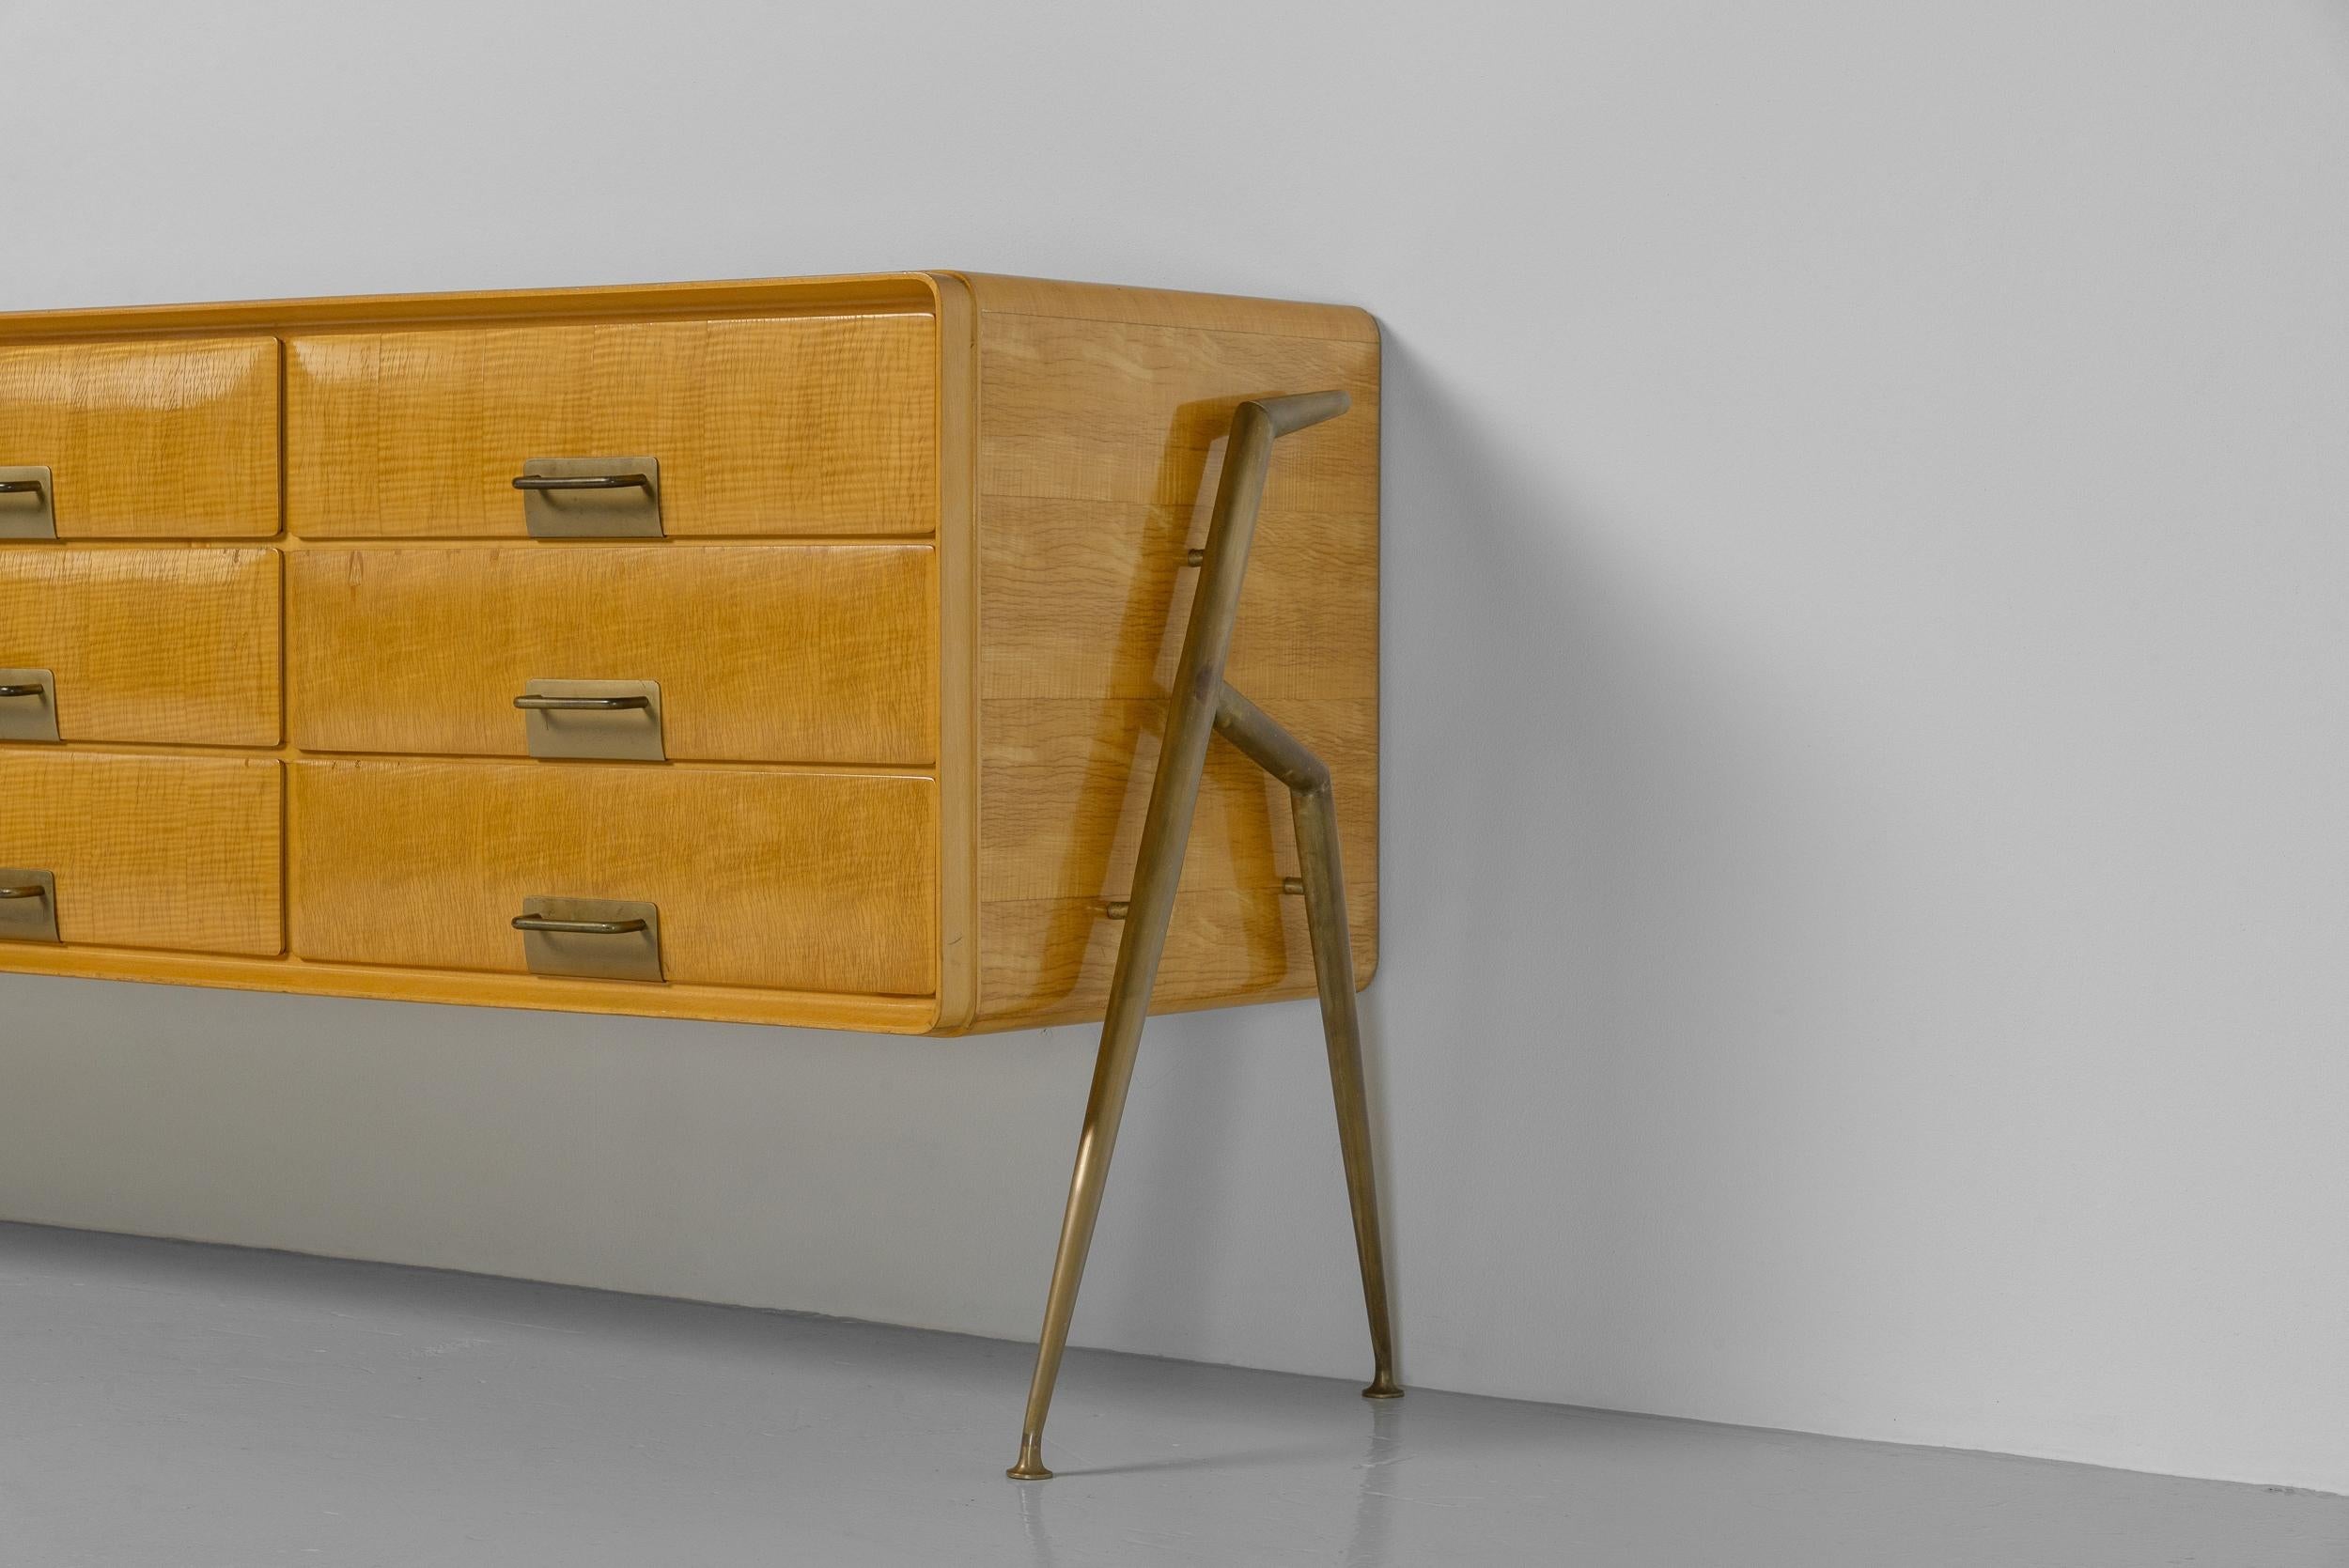 Rare drawer cabinet created by the renowned furniture designer Silvio Cavatorta in Italy 1958. Unlike the commonly seen six-drawer version with a mirror, this exceptional piece features nine drawers, making it truly unique. The cabinet is made from